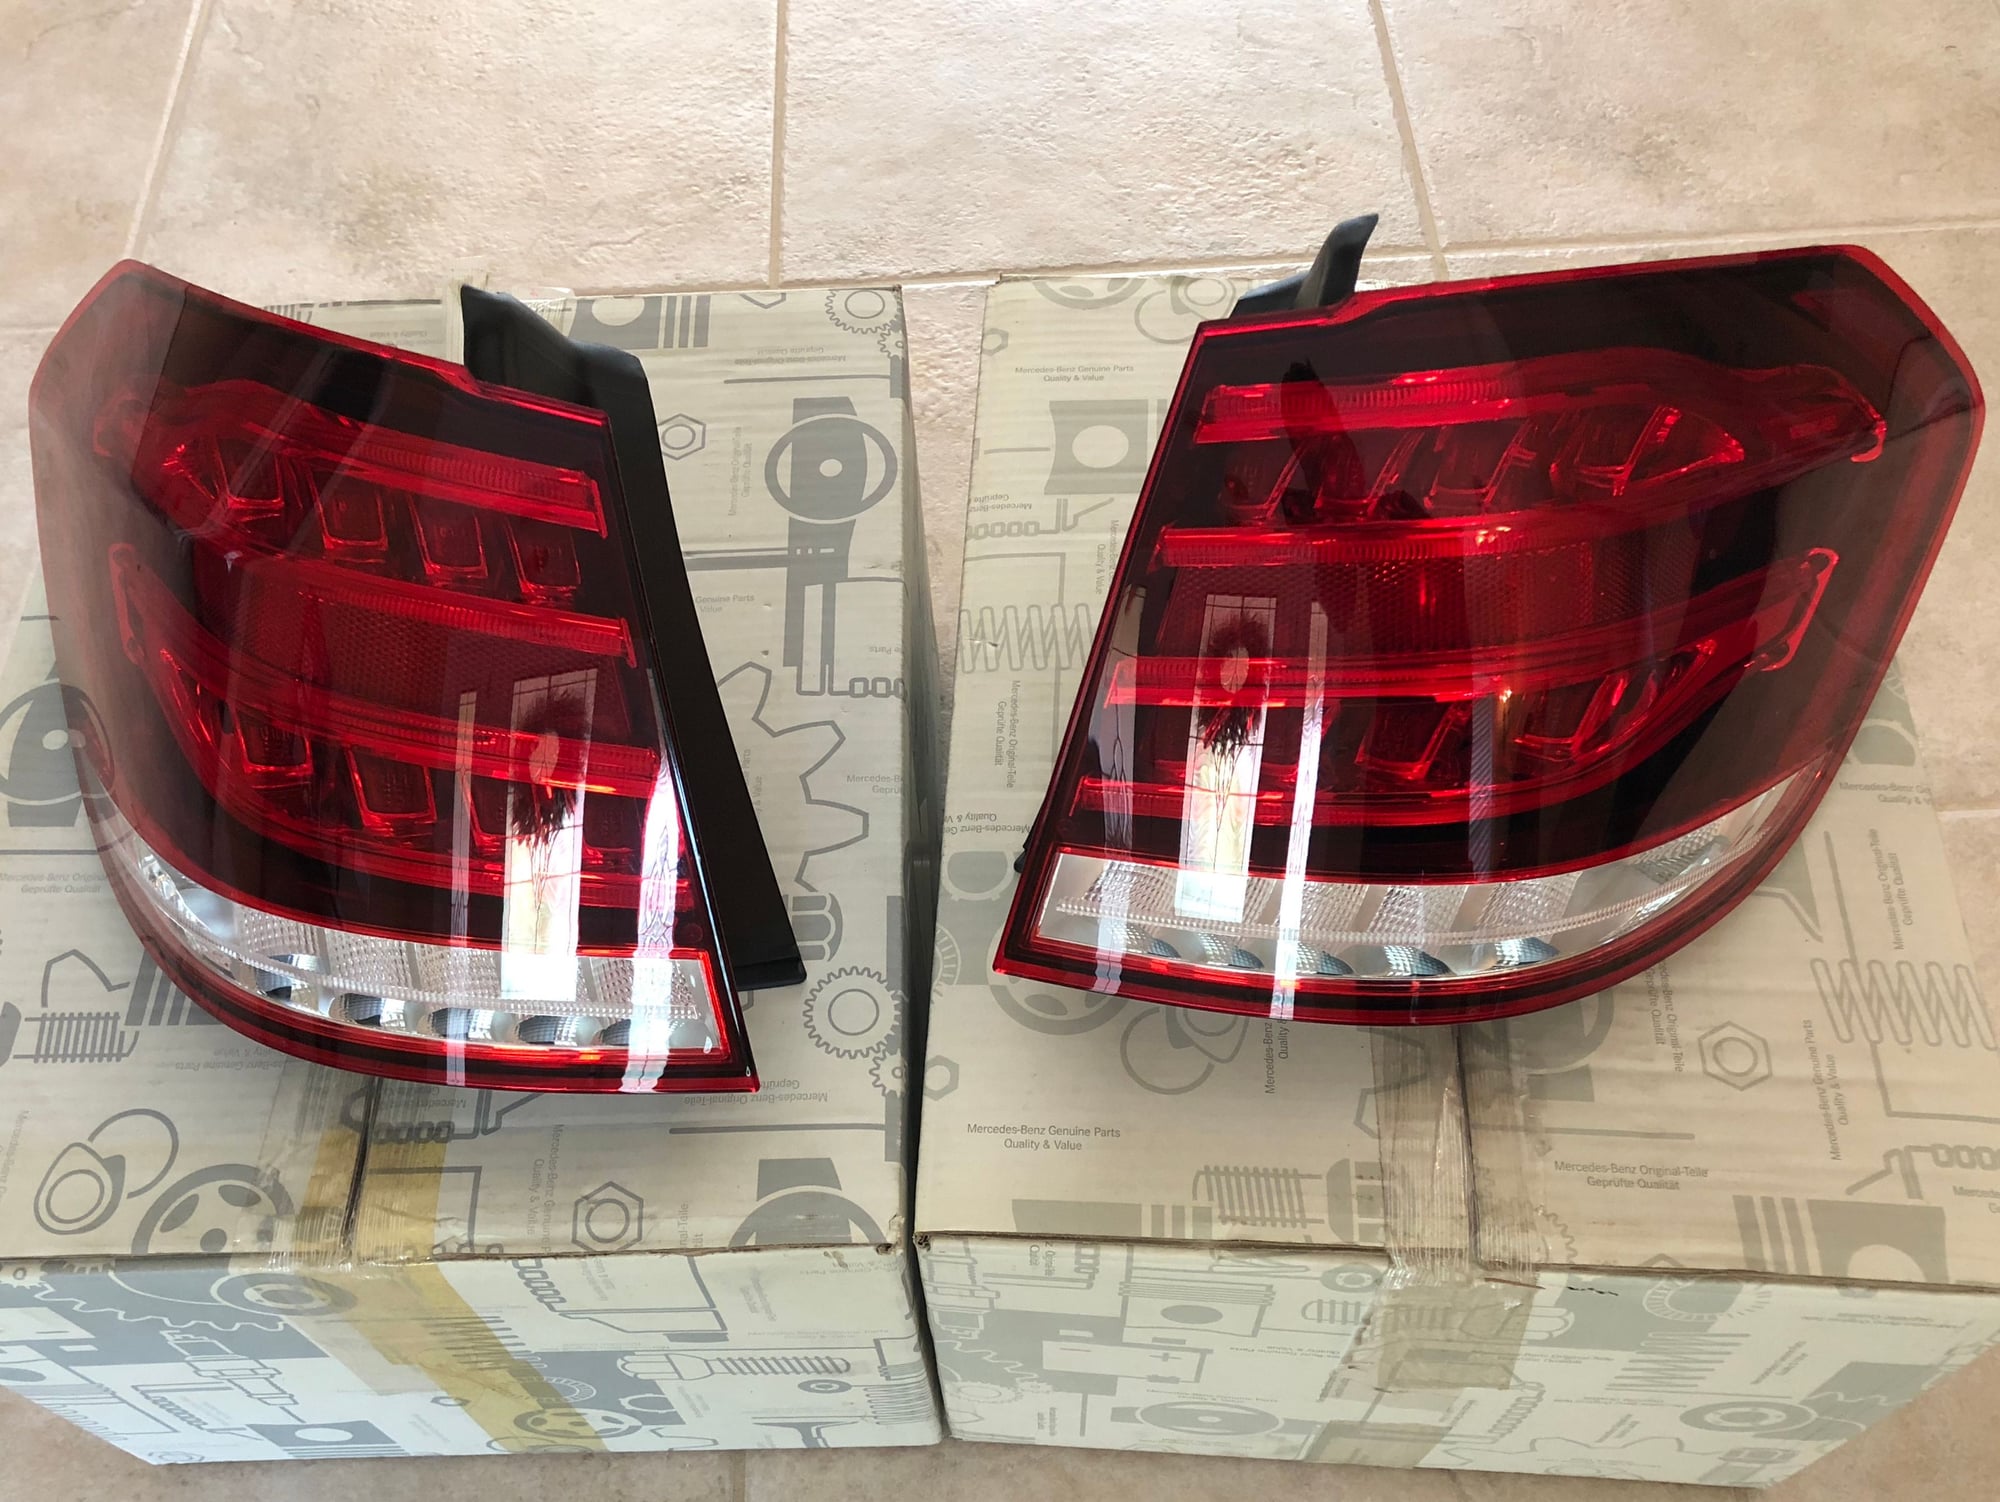 Lights - OEM EURO Spec E Class Tail Lights 2014-16 NIB FIRE SALE - New - 2014 to 2016 Mercedes-Benz E63 AMG S - 2014 to 2016 Mercedes-Benz E300 - Collierville, TN 38017, United States